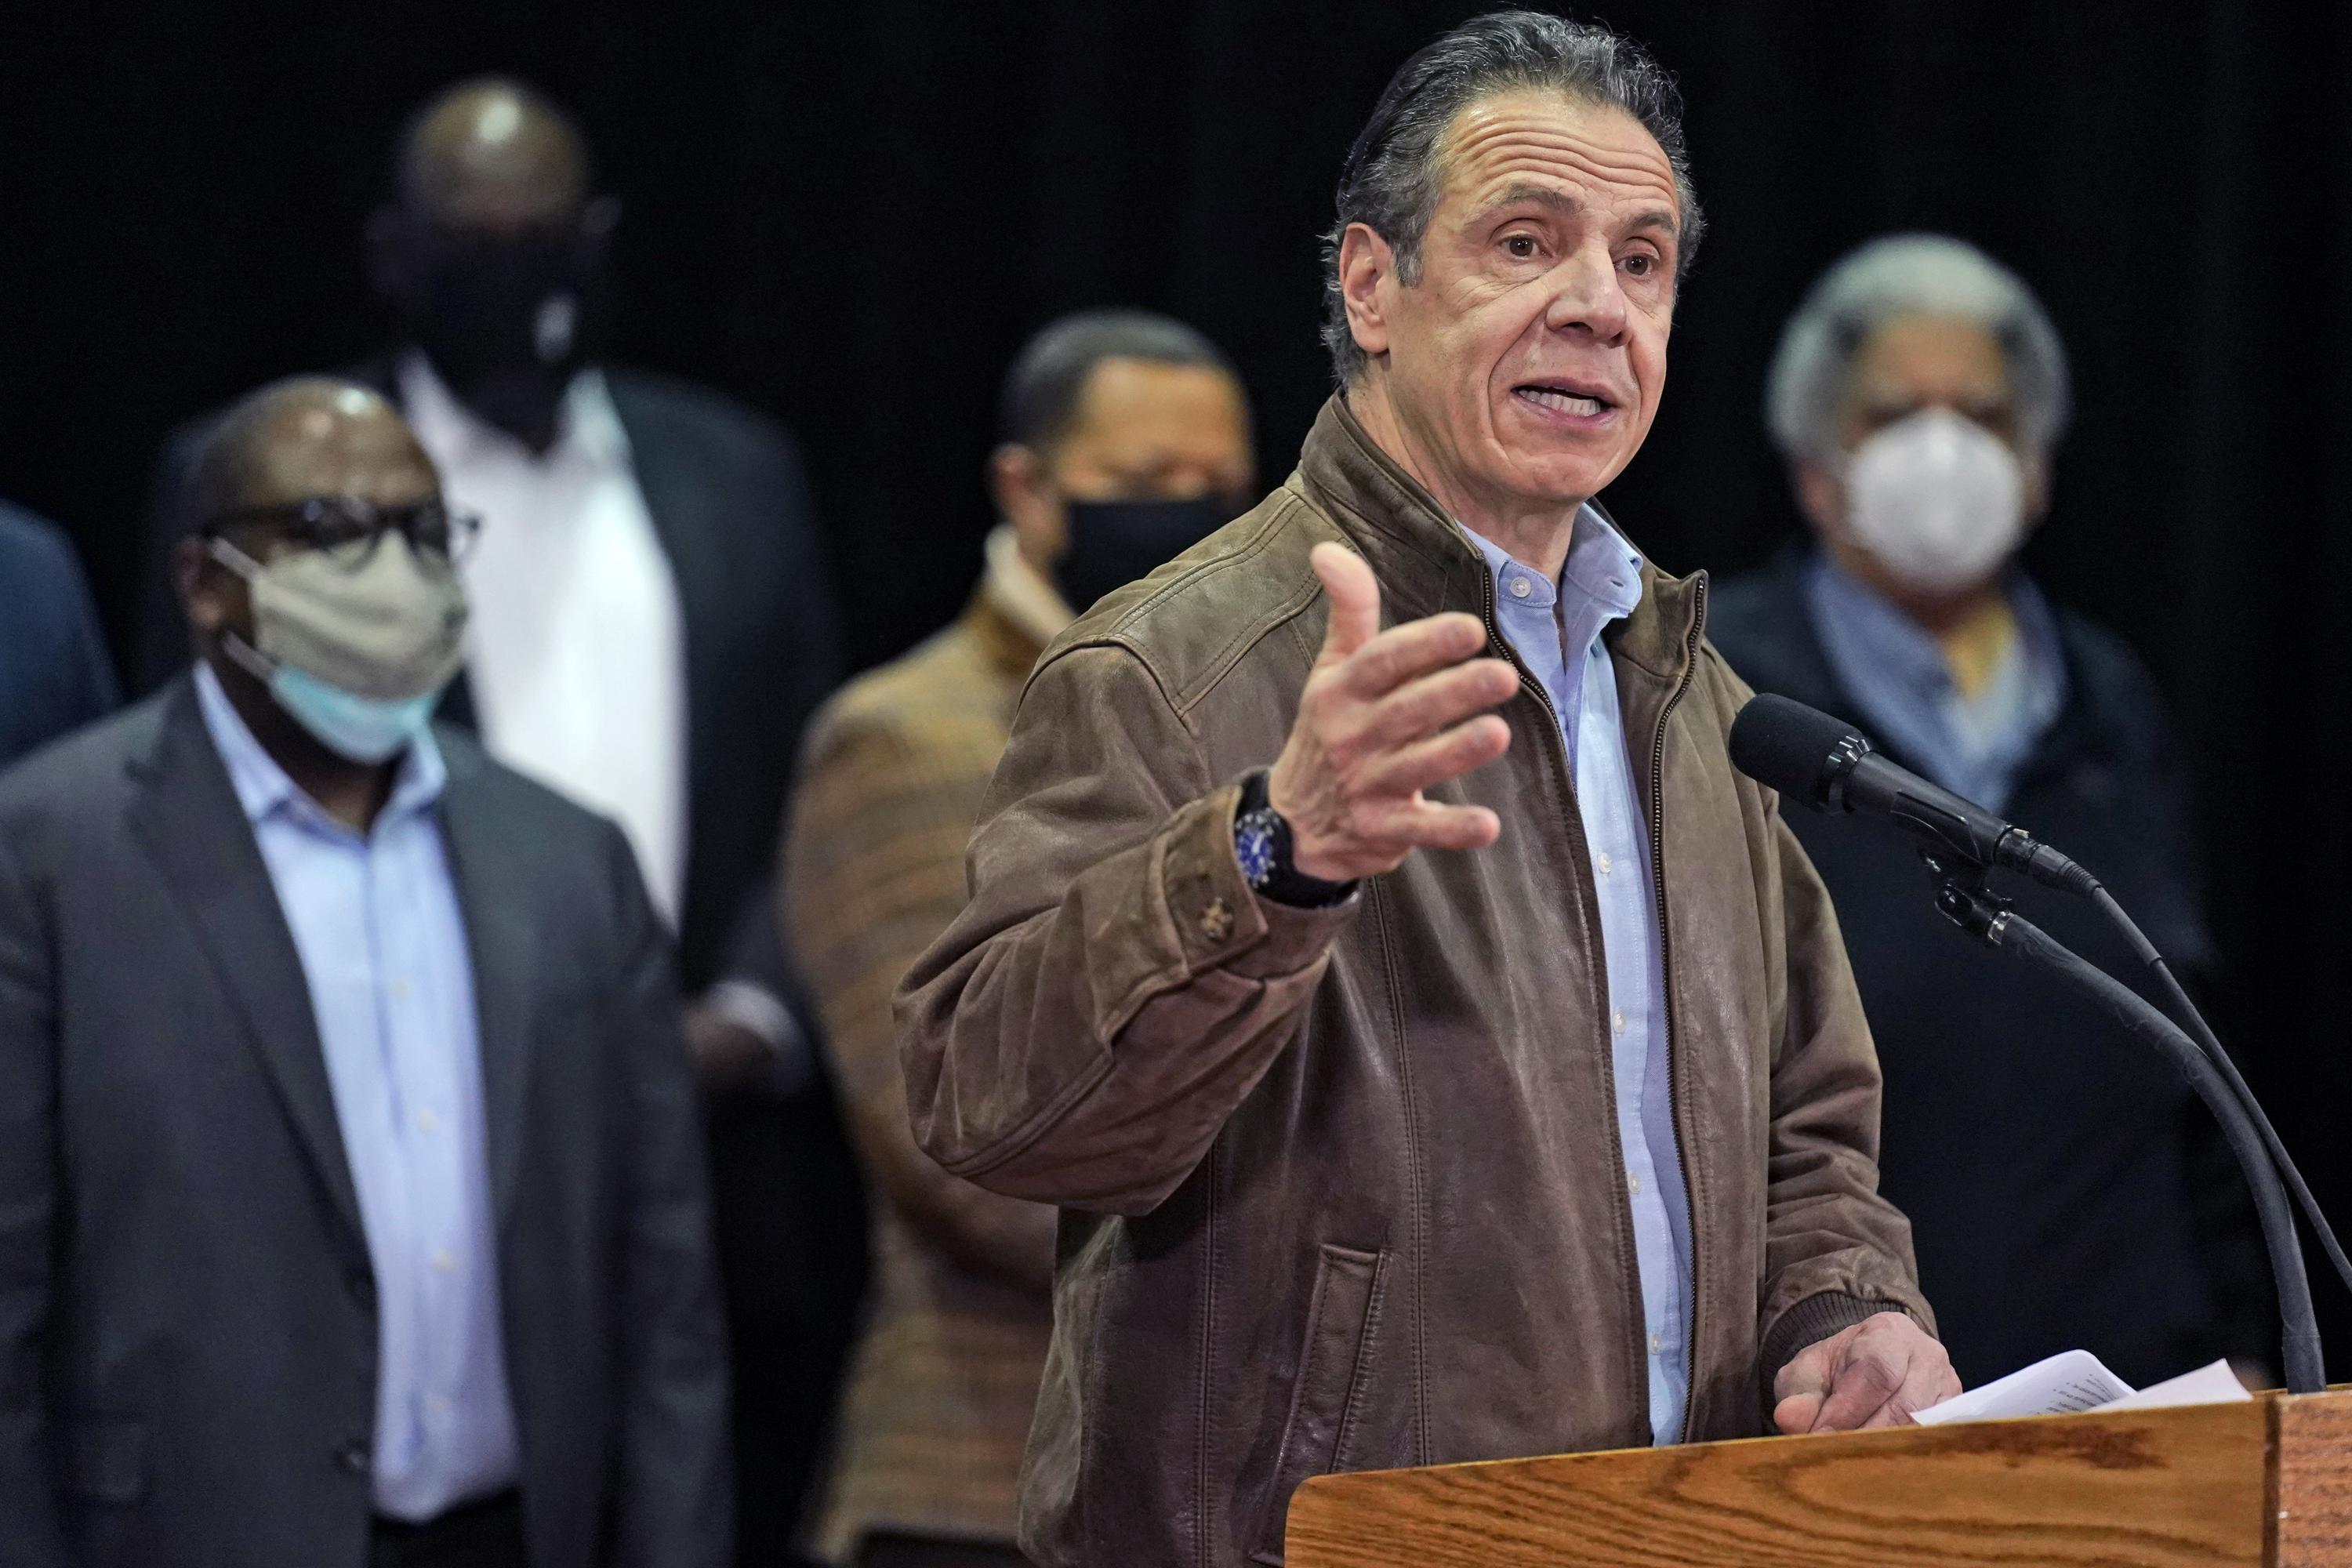 2nd Former Assistant Accuses Cuomo of Sexual Harassment